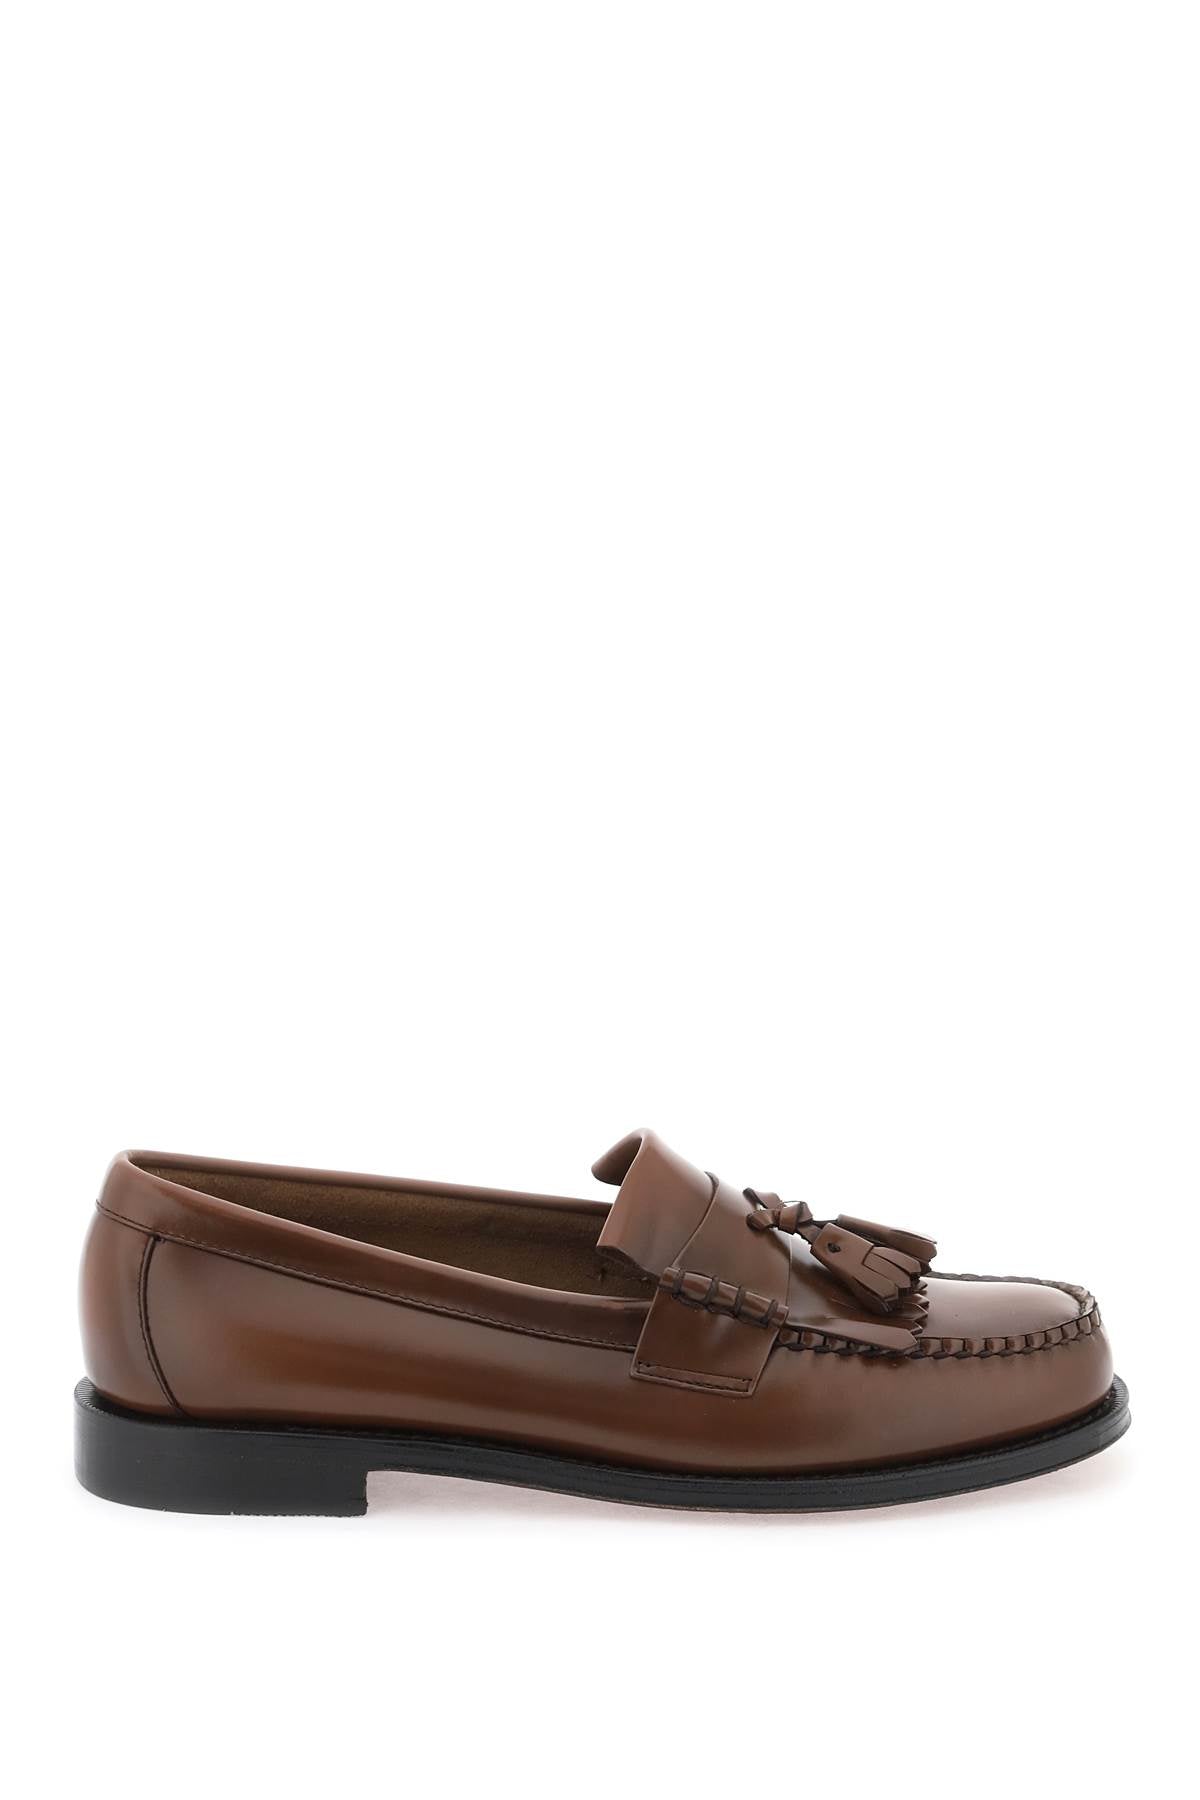 G.h. bass esther kiltie weejuns loafers-0